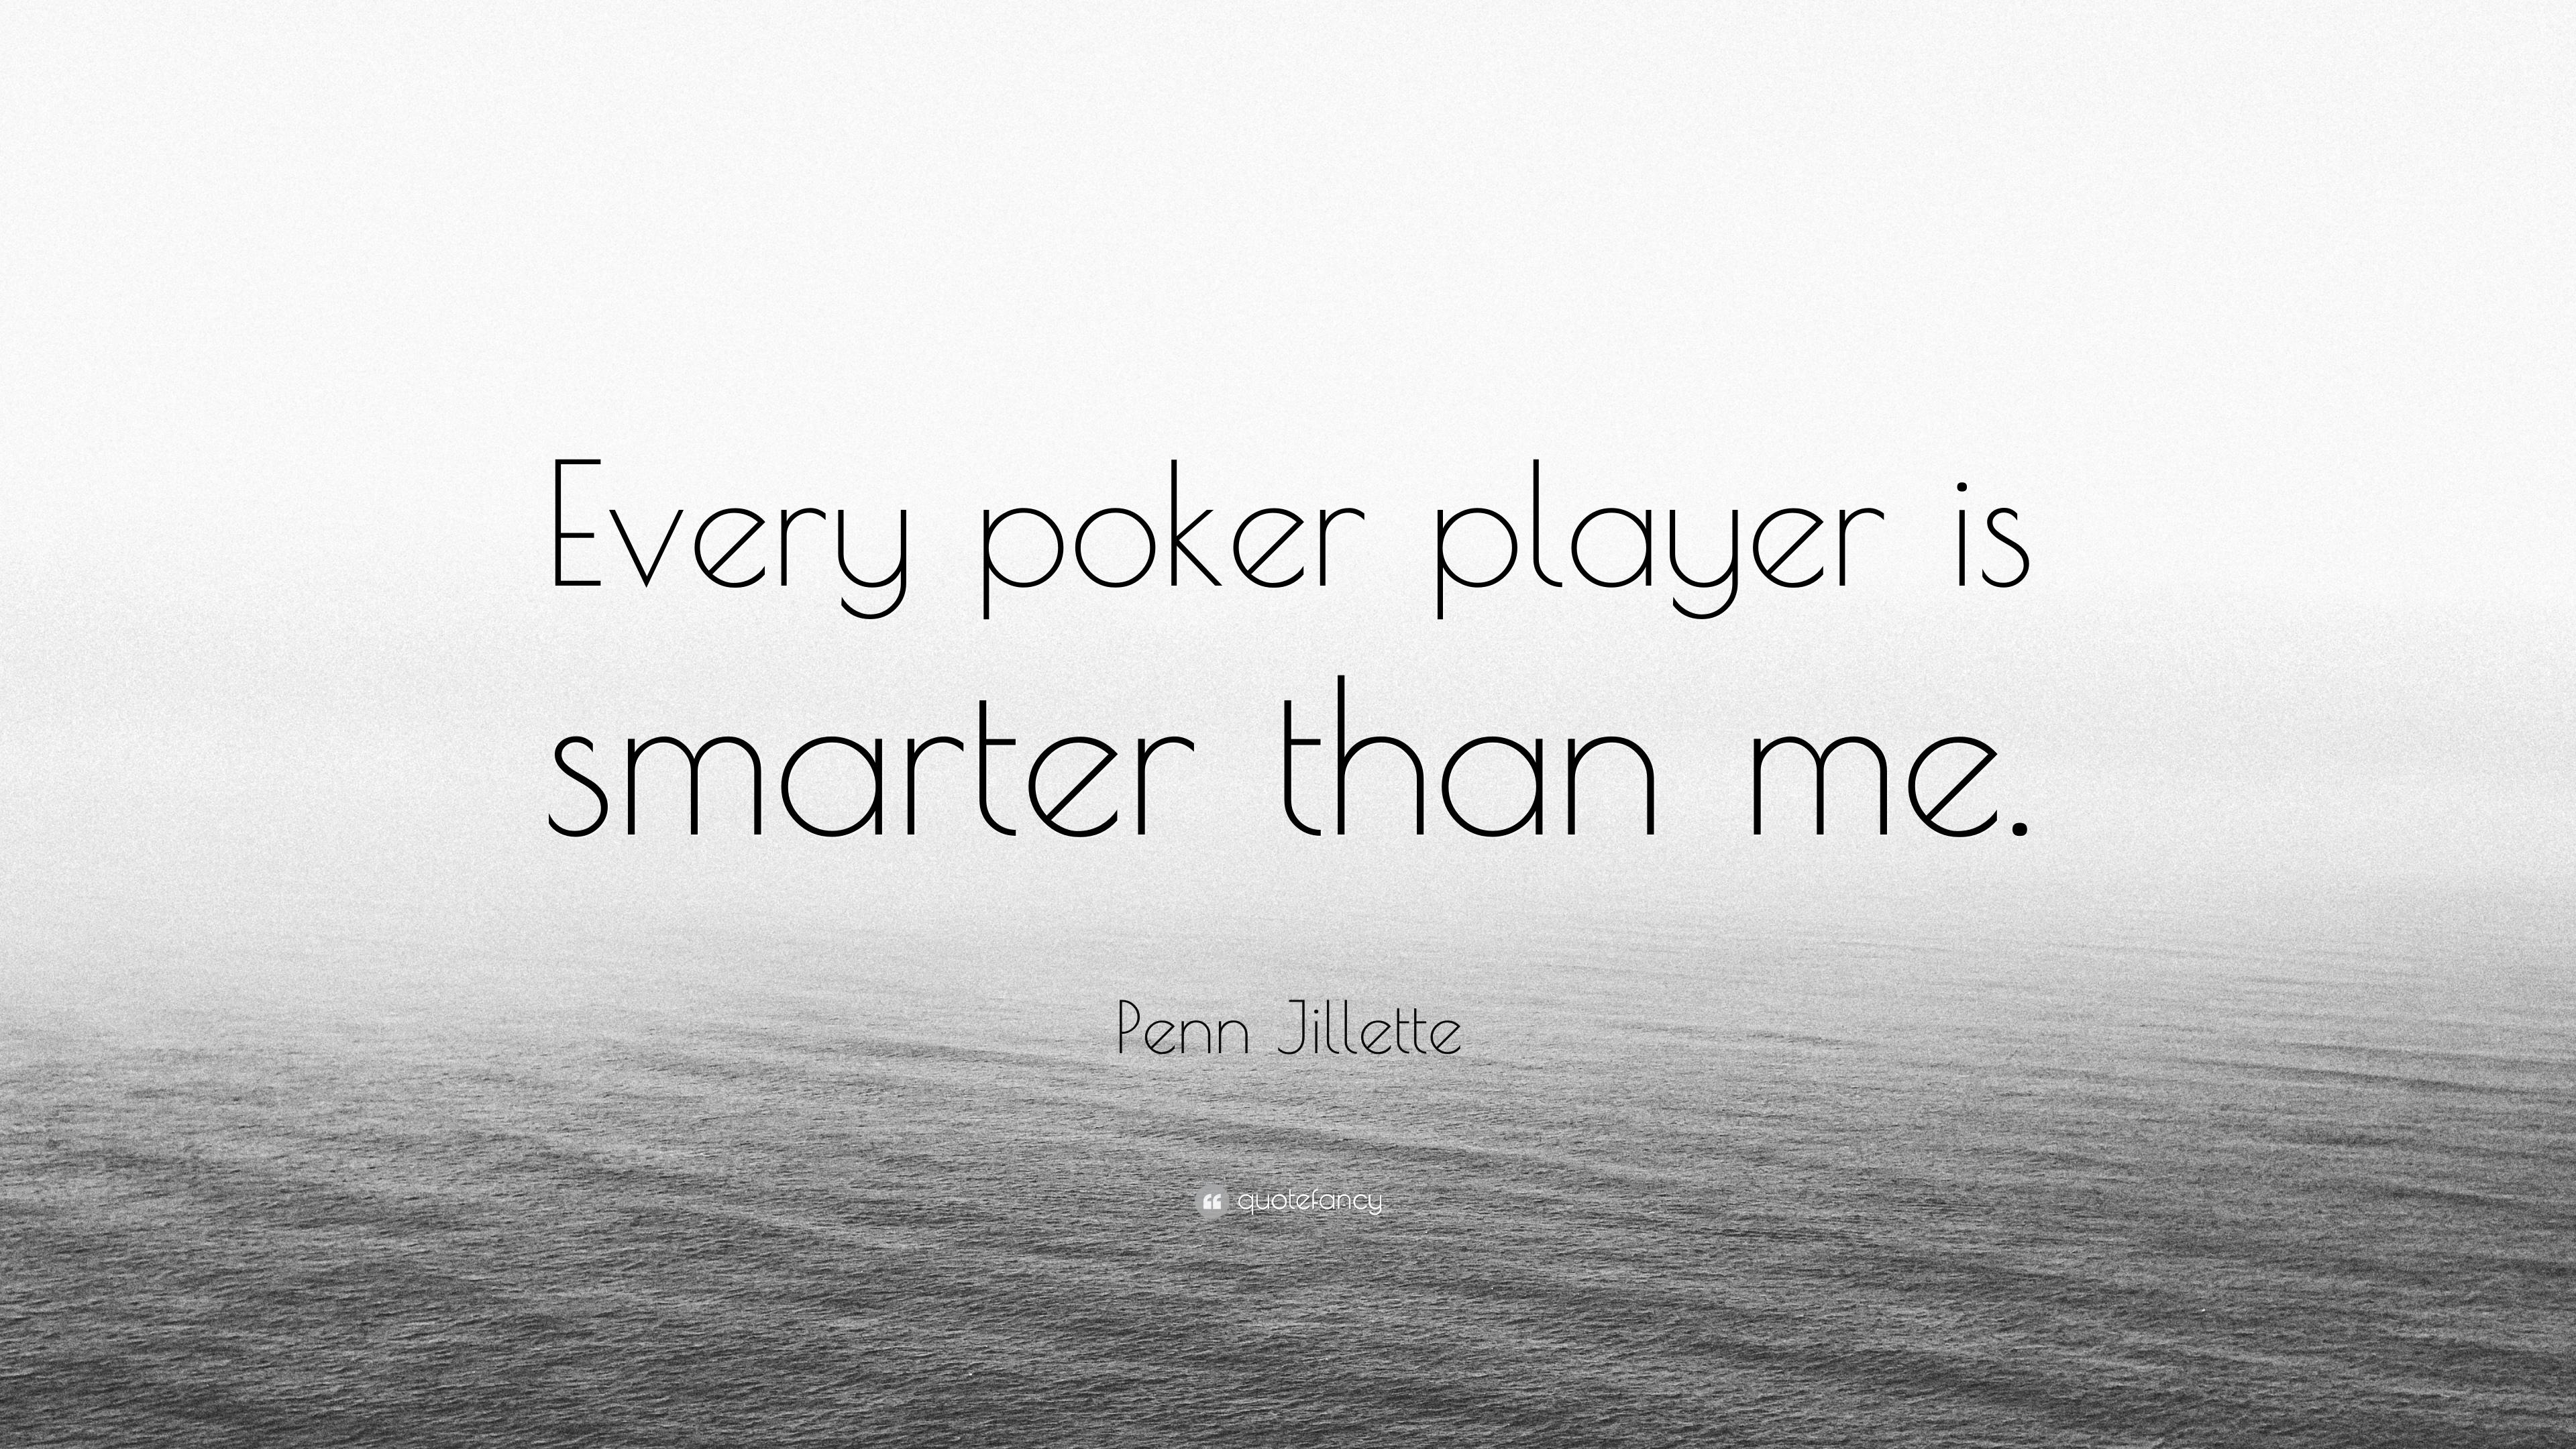 Penn Jillette Quote: “Every poker player is smarter than me.” 7